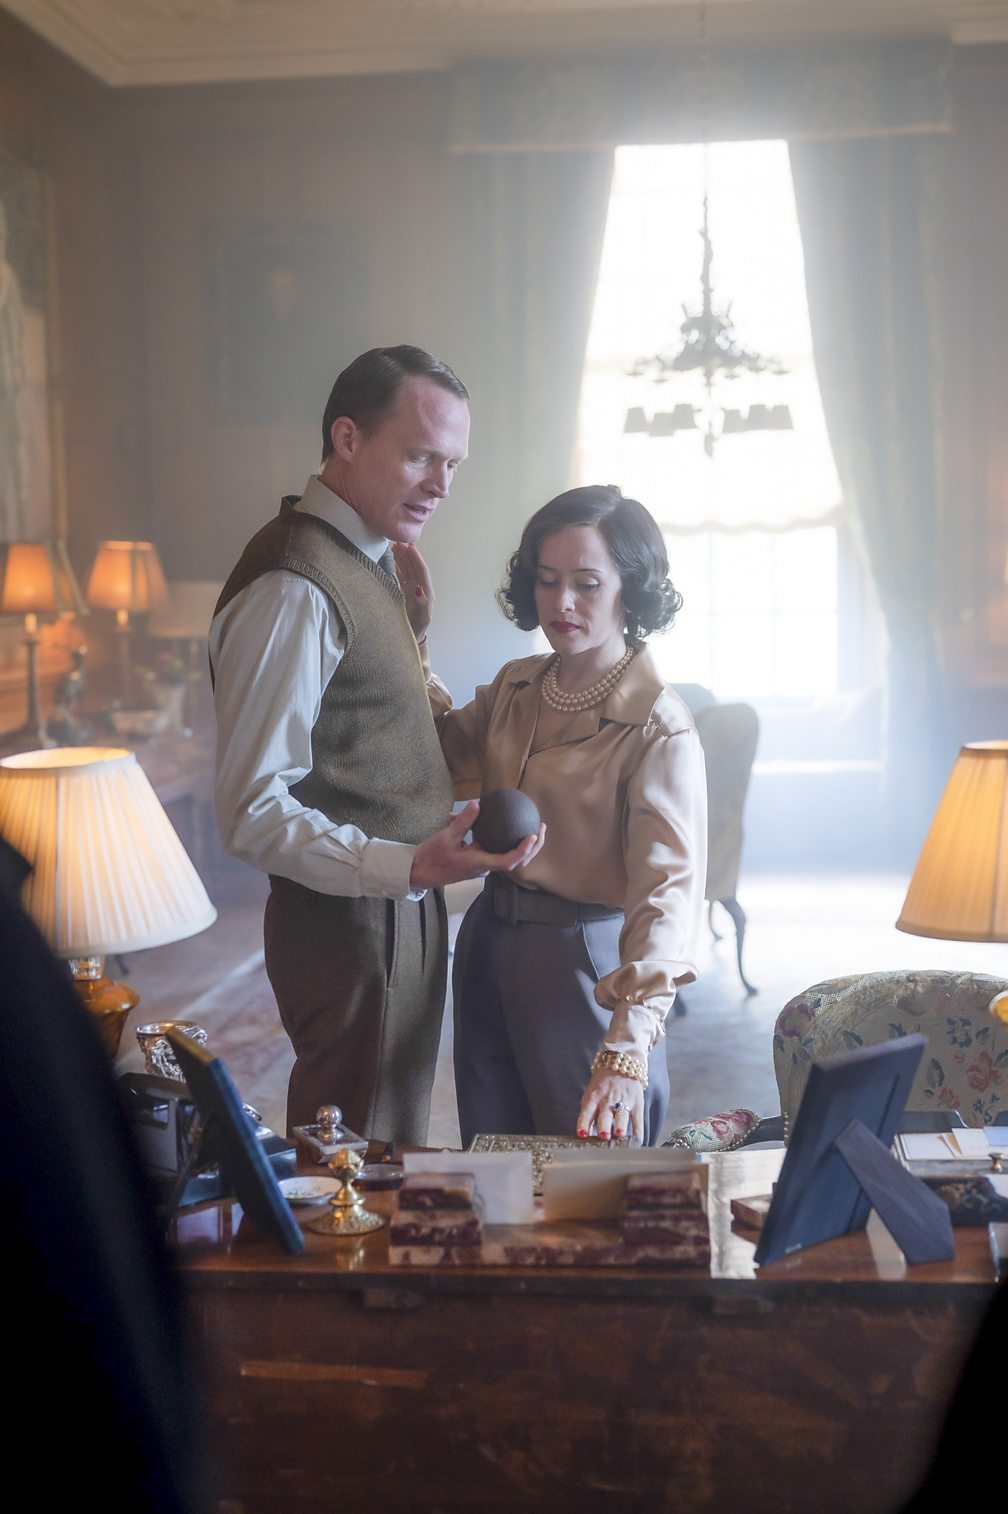 Claire Foy and Paul Bettany in “A Very British Scandal"